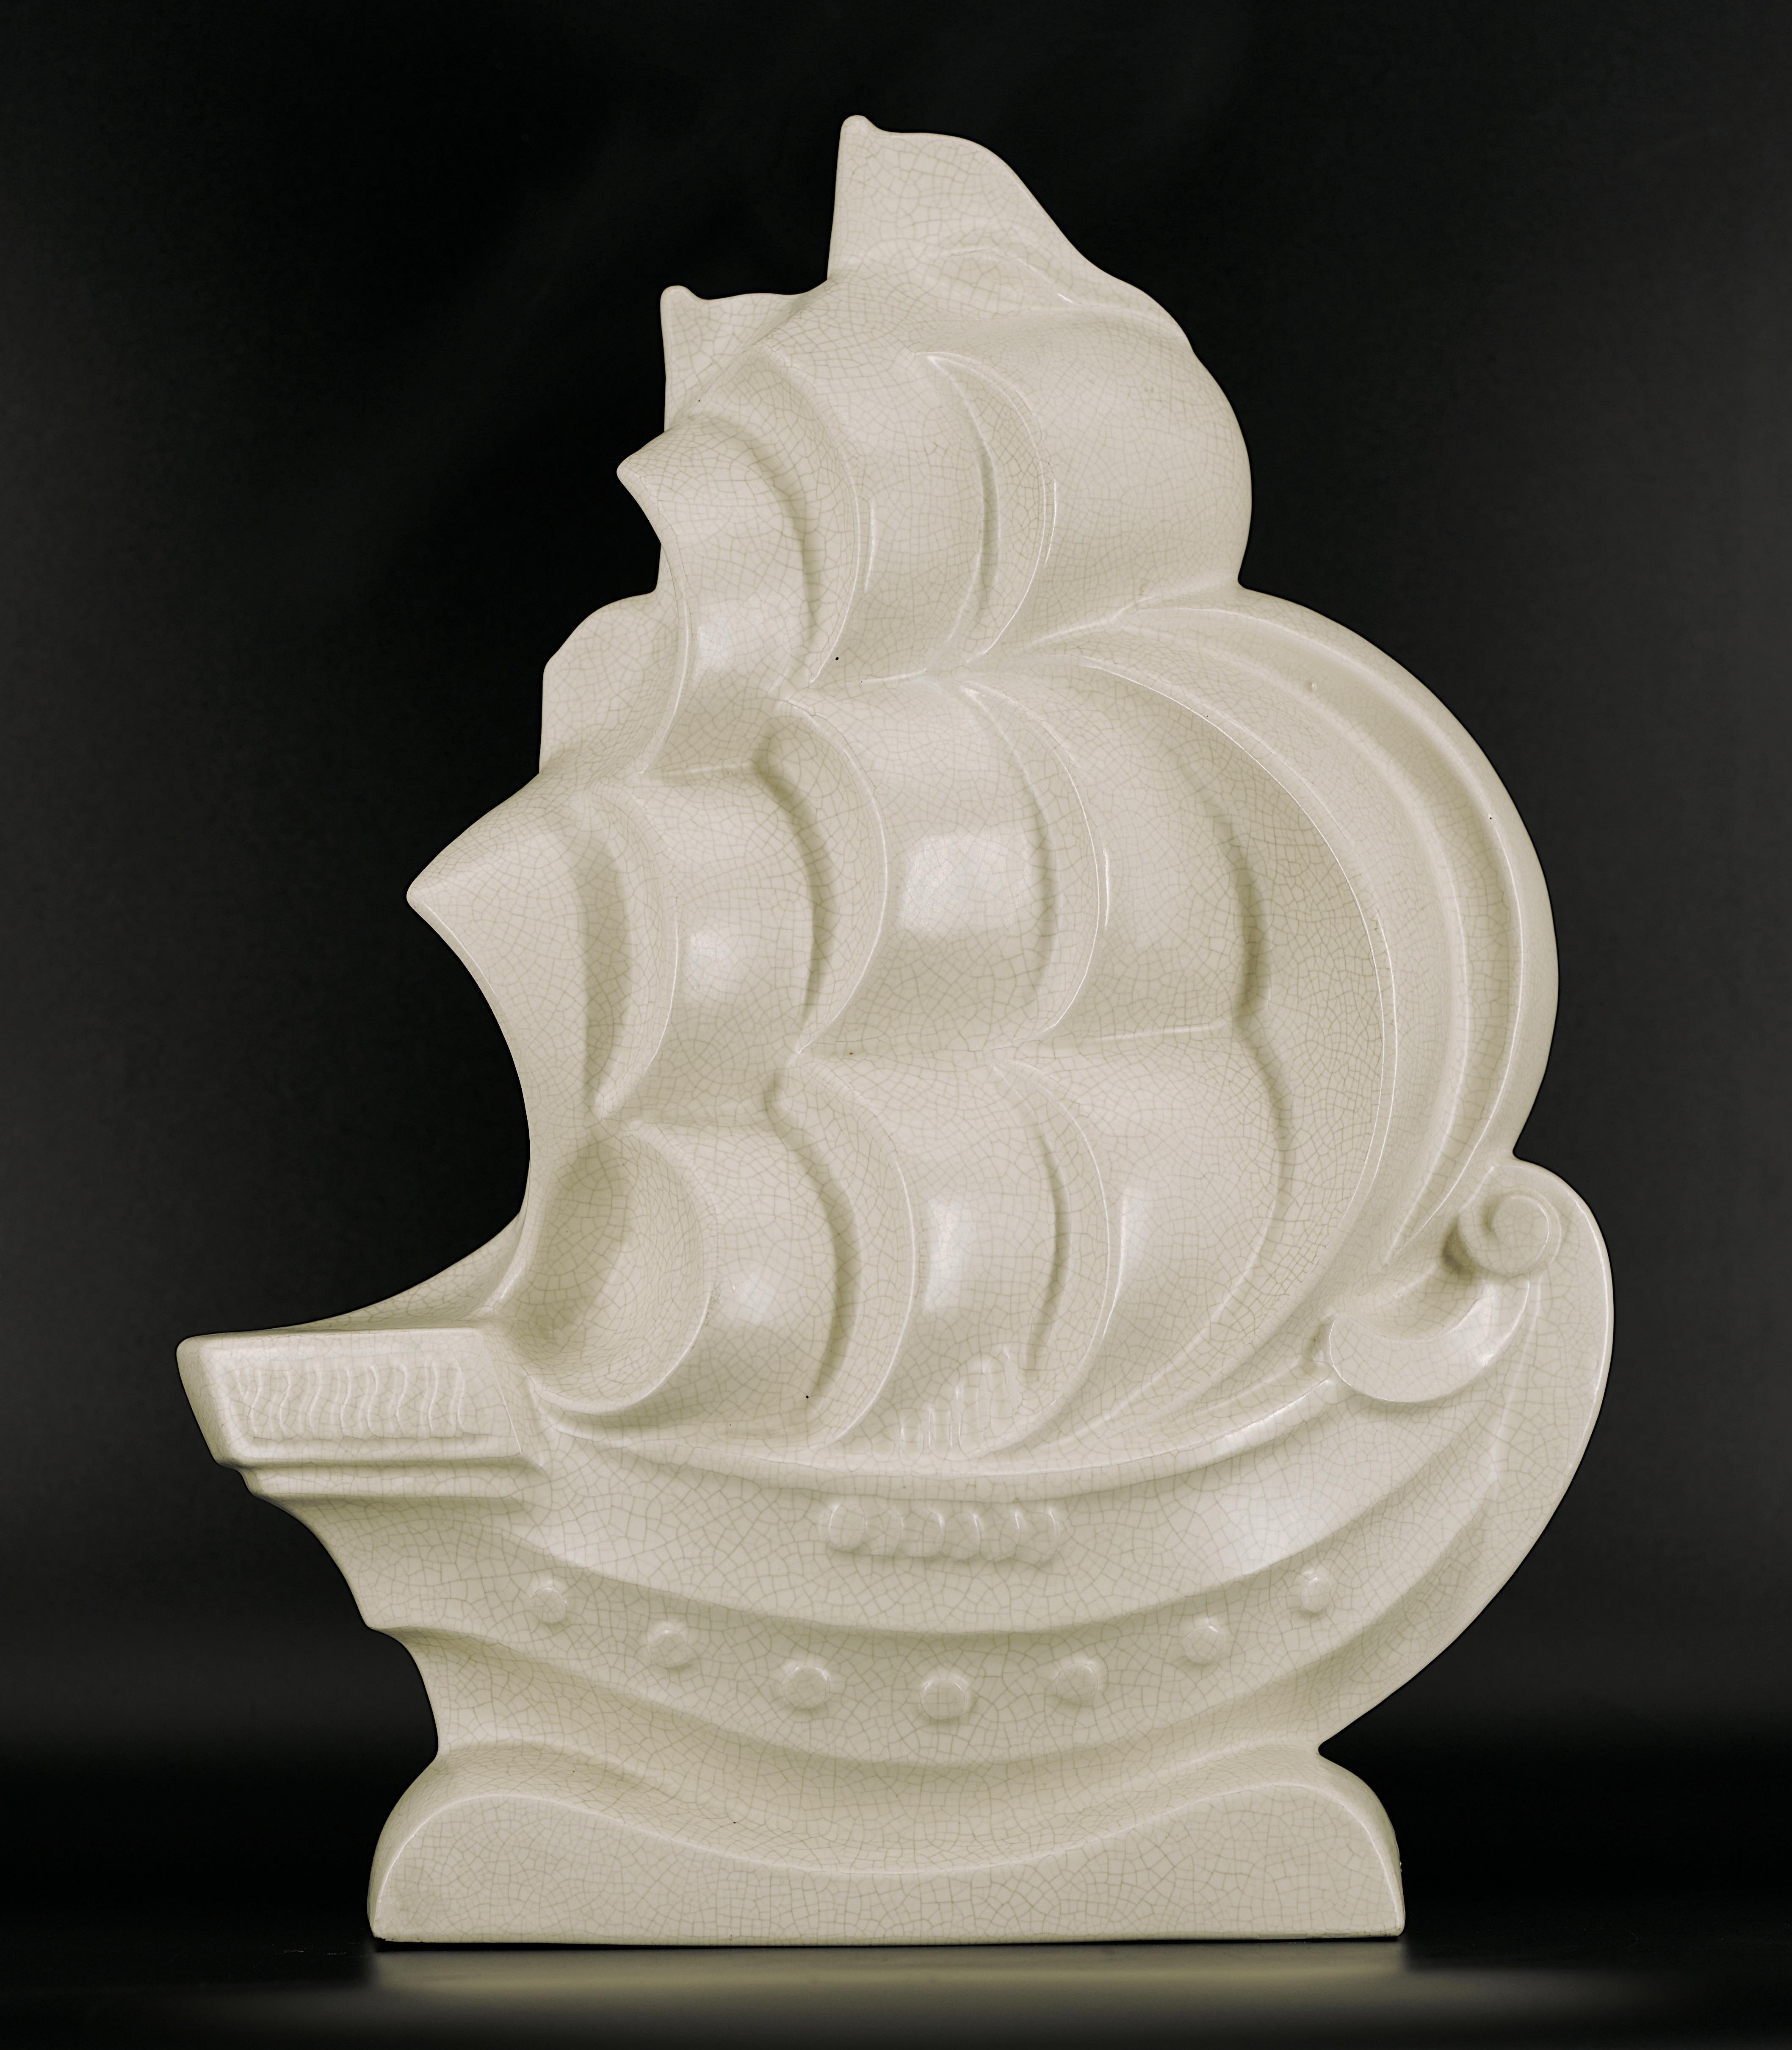 Early 20th Century Lejan French Art Deco Crackle Glaze Ceramic Ship Sculpture at Orchies's, 1930 For Sale